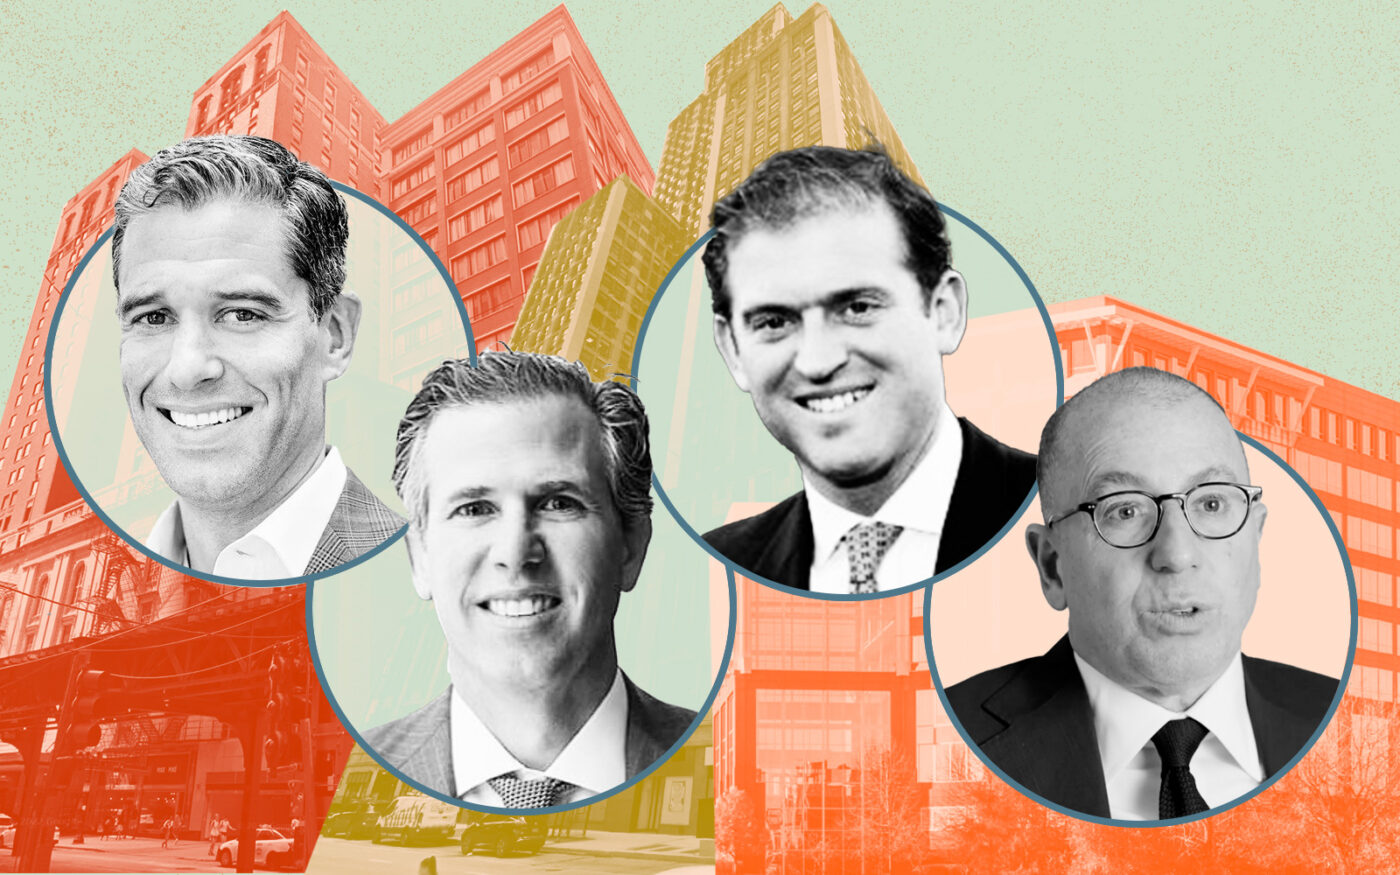 Lincoln Property Company's David Binswanger and Clay Duvall, AmTrust Real Estate's Jonathan Bennett and Thor Equities' Joe Sitt with Palmer House Hilton Chicago, Field Building and Central Park of Lisle